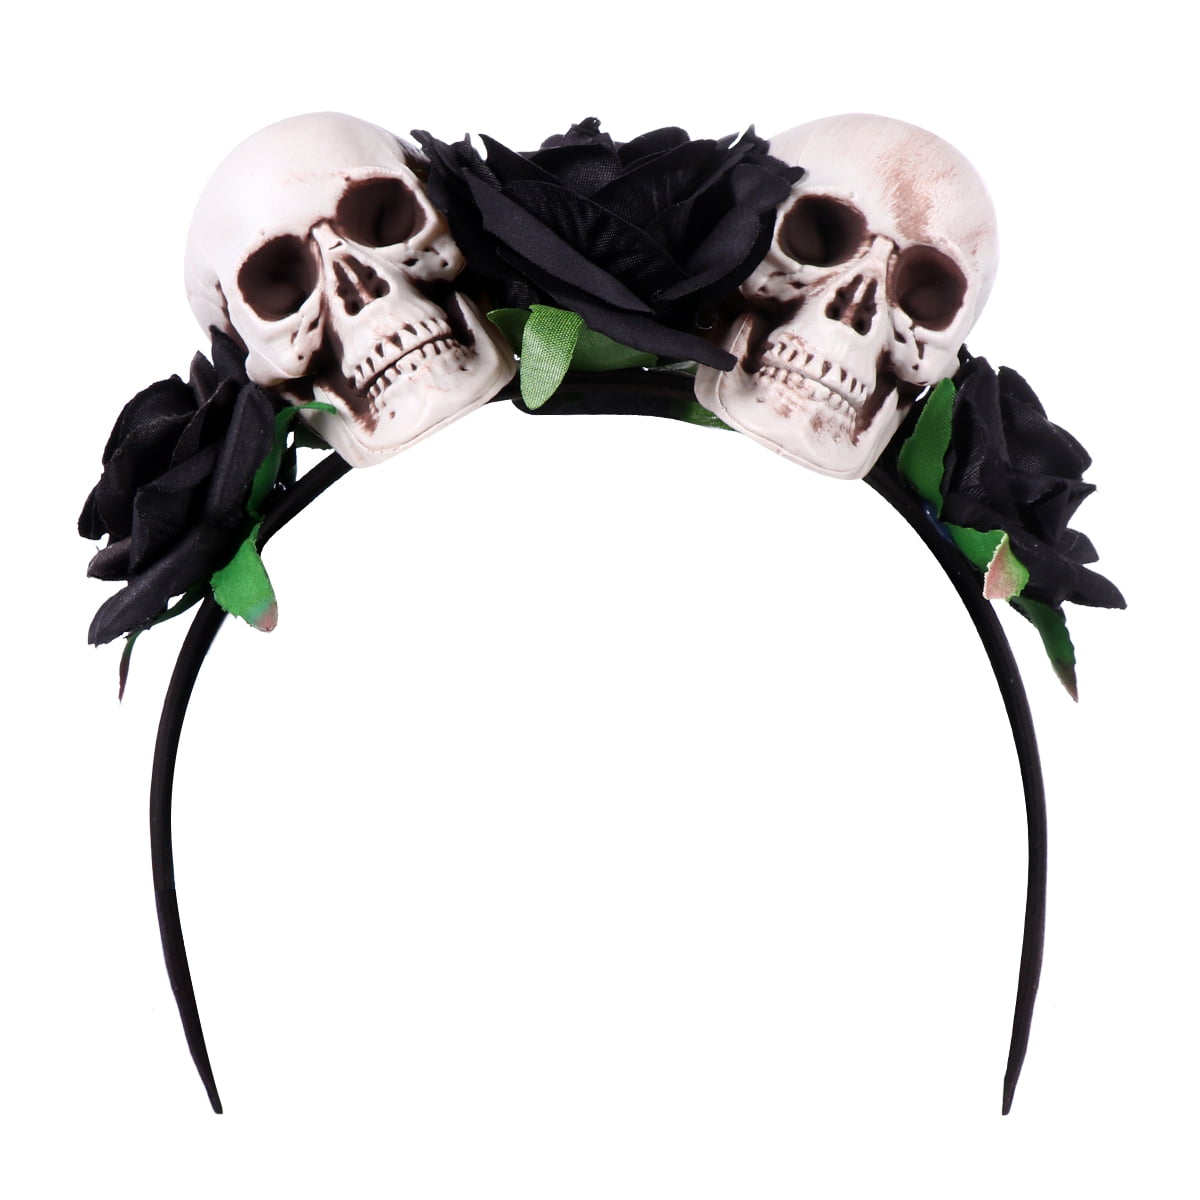 goth ravens pumpkins zombies halloween themed hoop earrings horror ghosts cats gothic witchcraft spiders